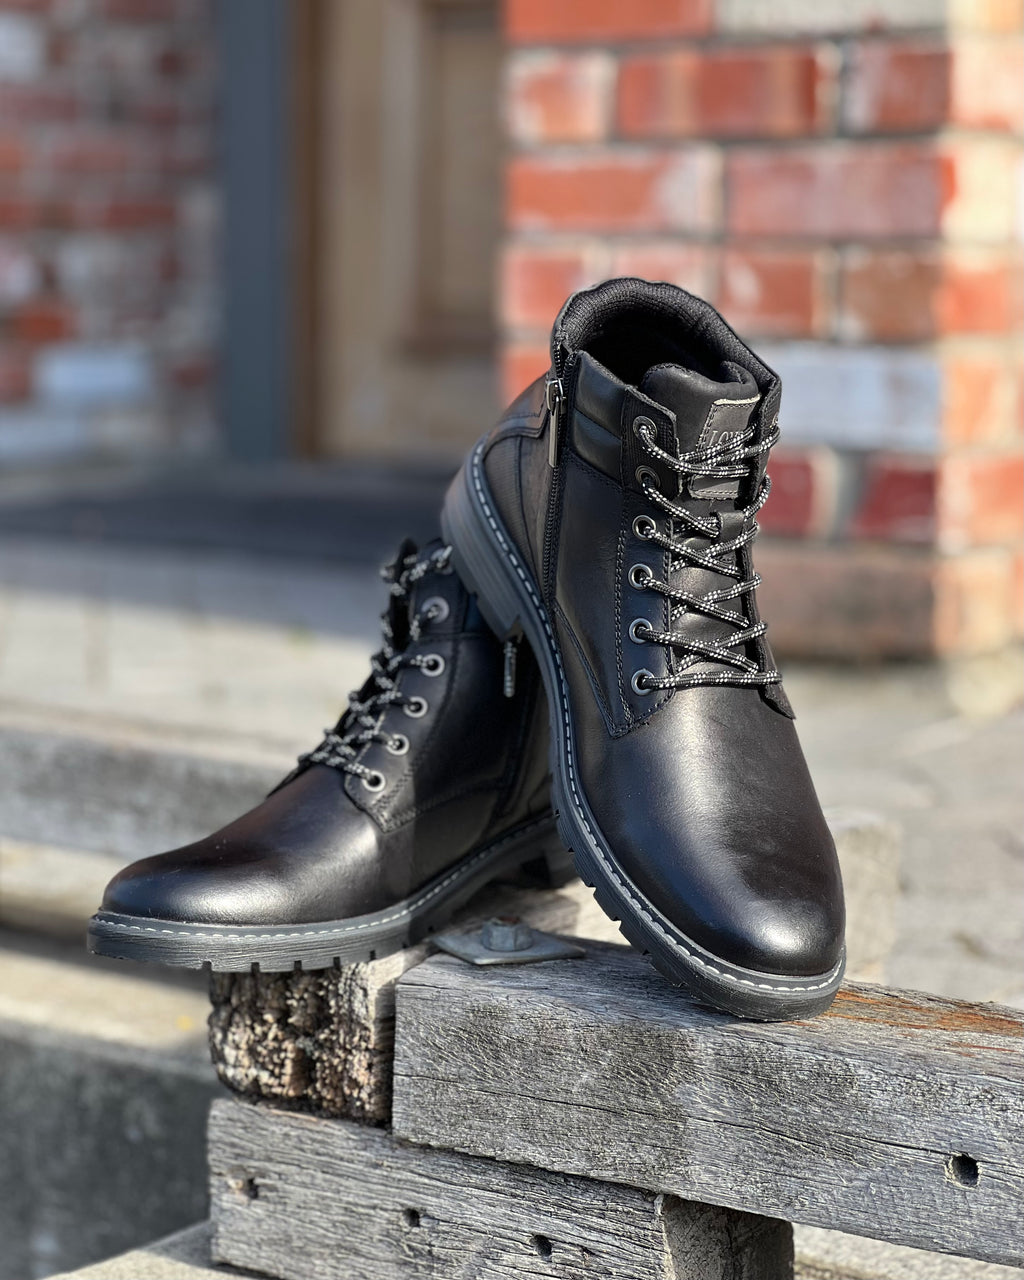 Mens leather boots - zipper and lace-up by Londons Life